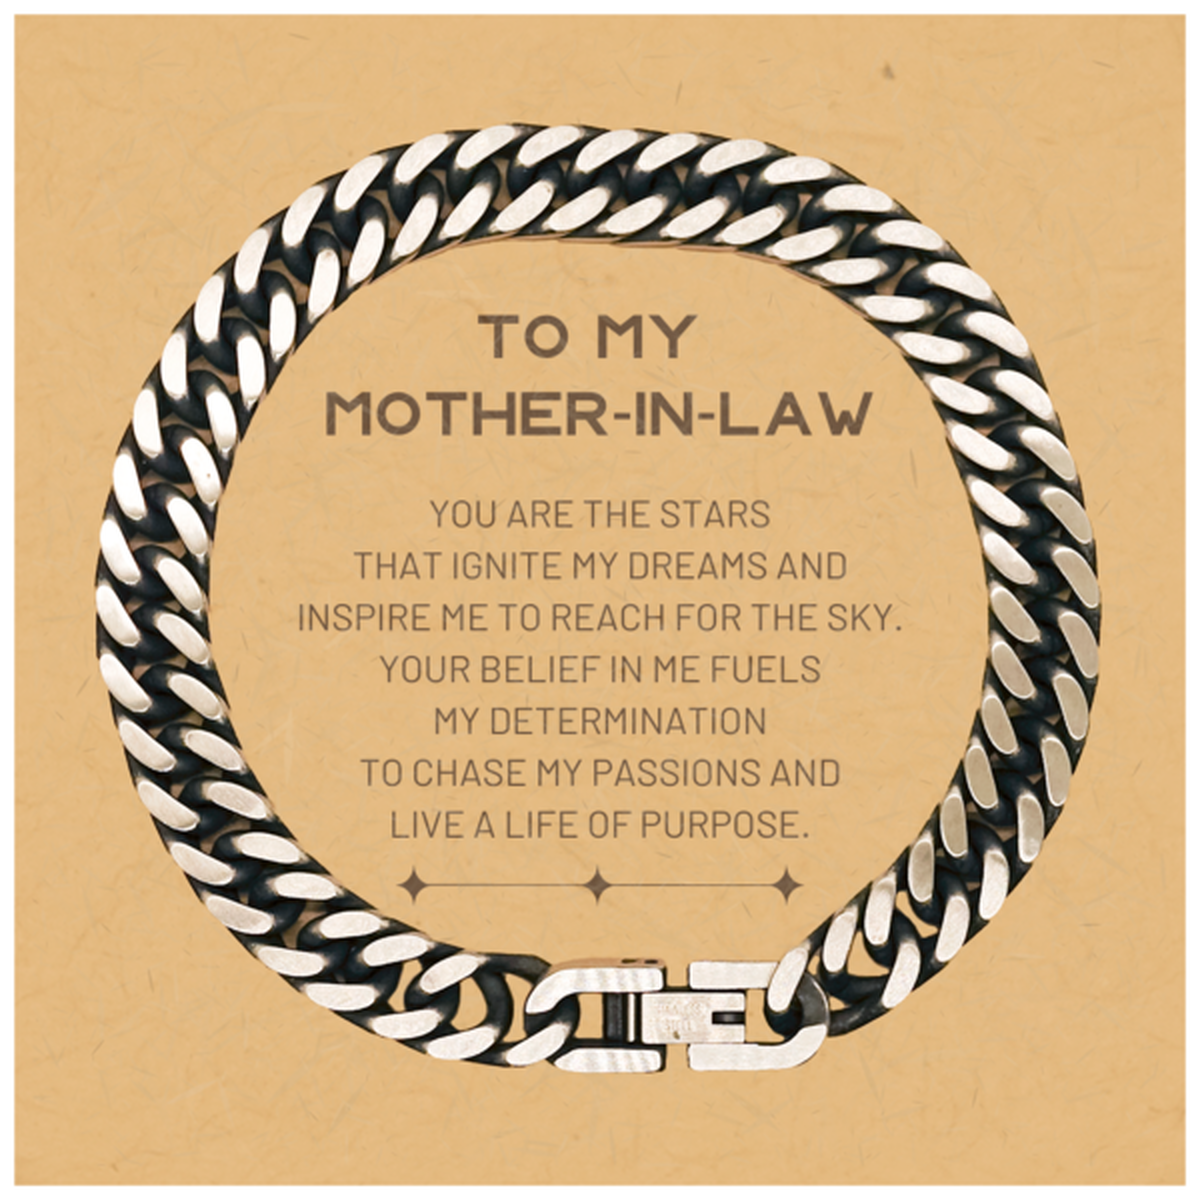 To My Mother-In-Law Cuban Link Chain Bracelet, You are the stars that ignite my dreams and inspire me to reach for the sky, Birthday Christmas Unique Gifts For Mother-In-Law, Thank You Gifts For Mother-In-Law